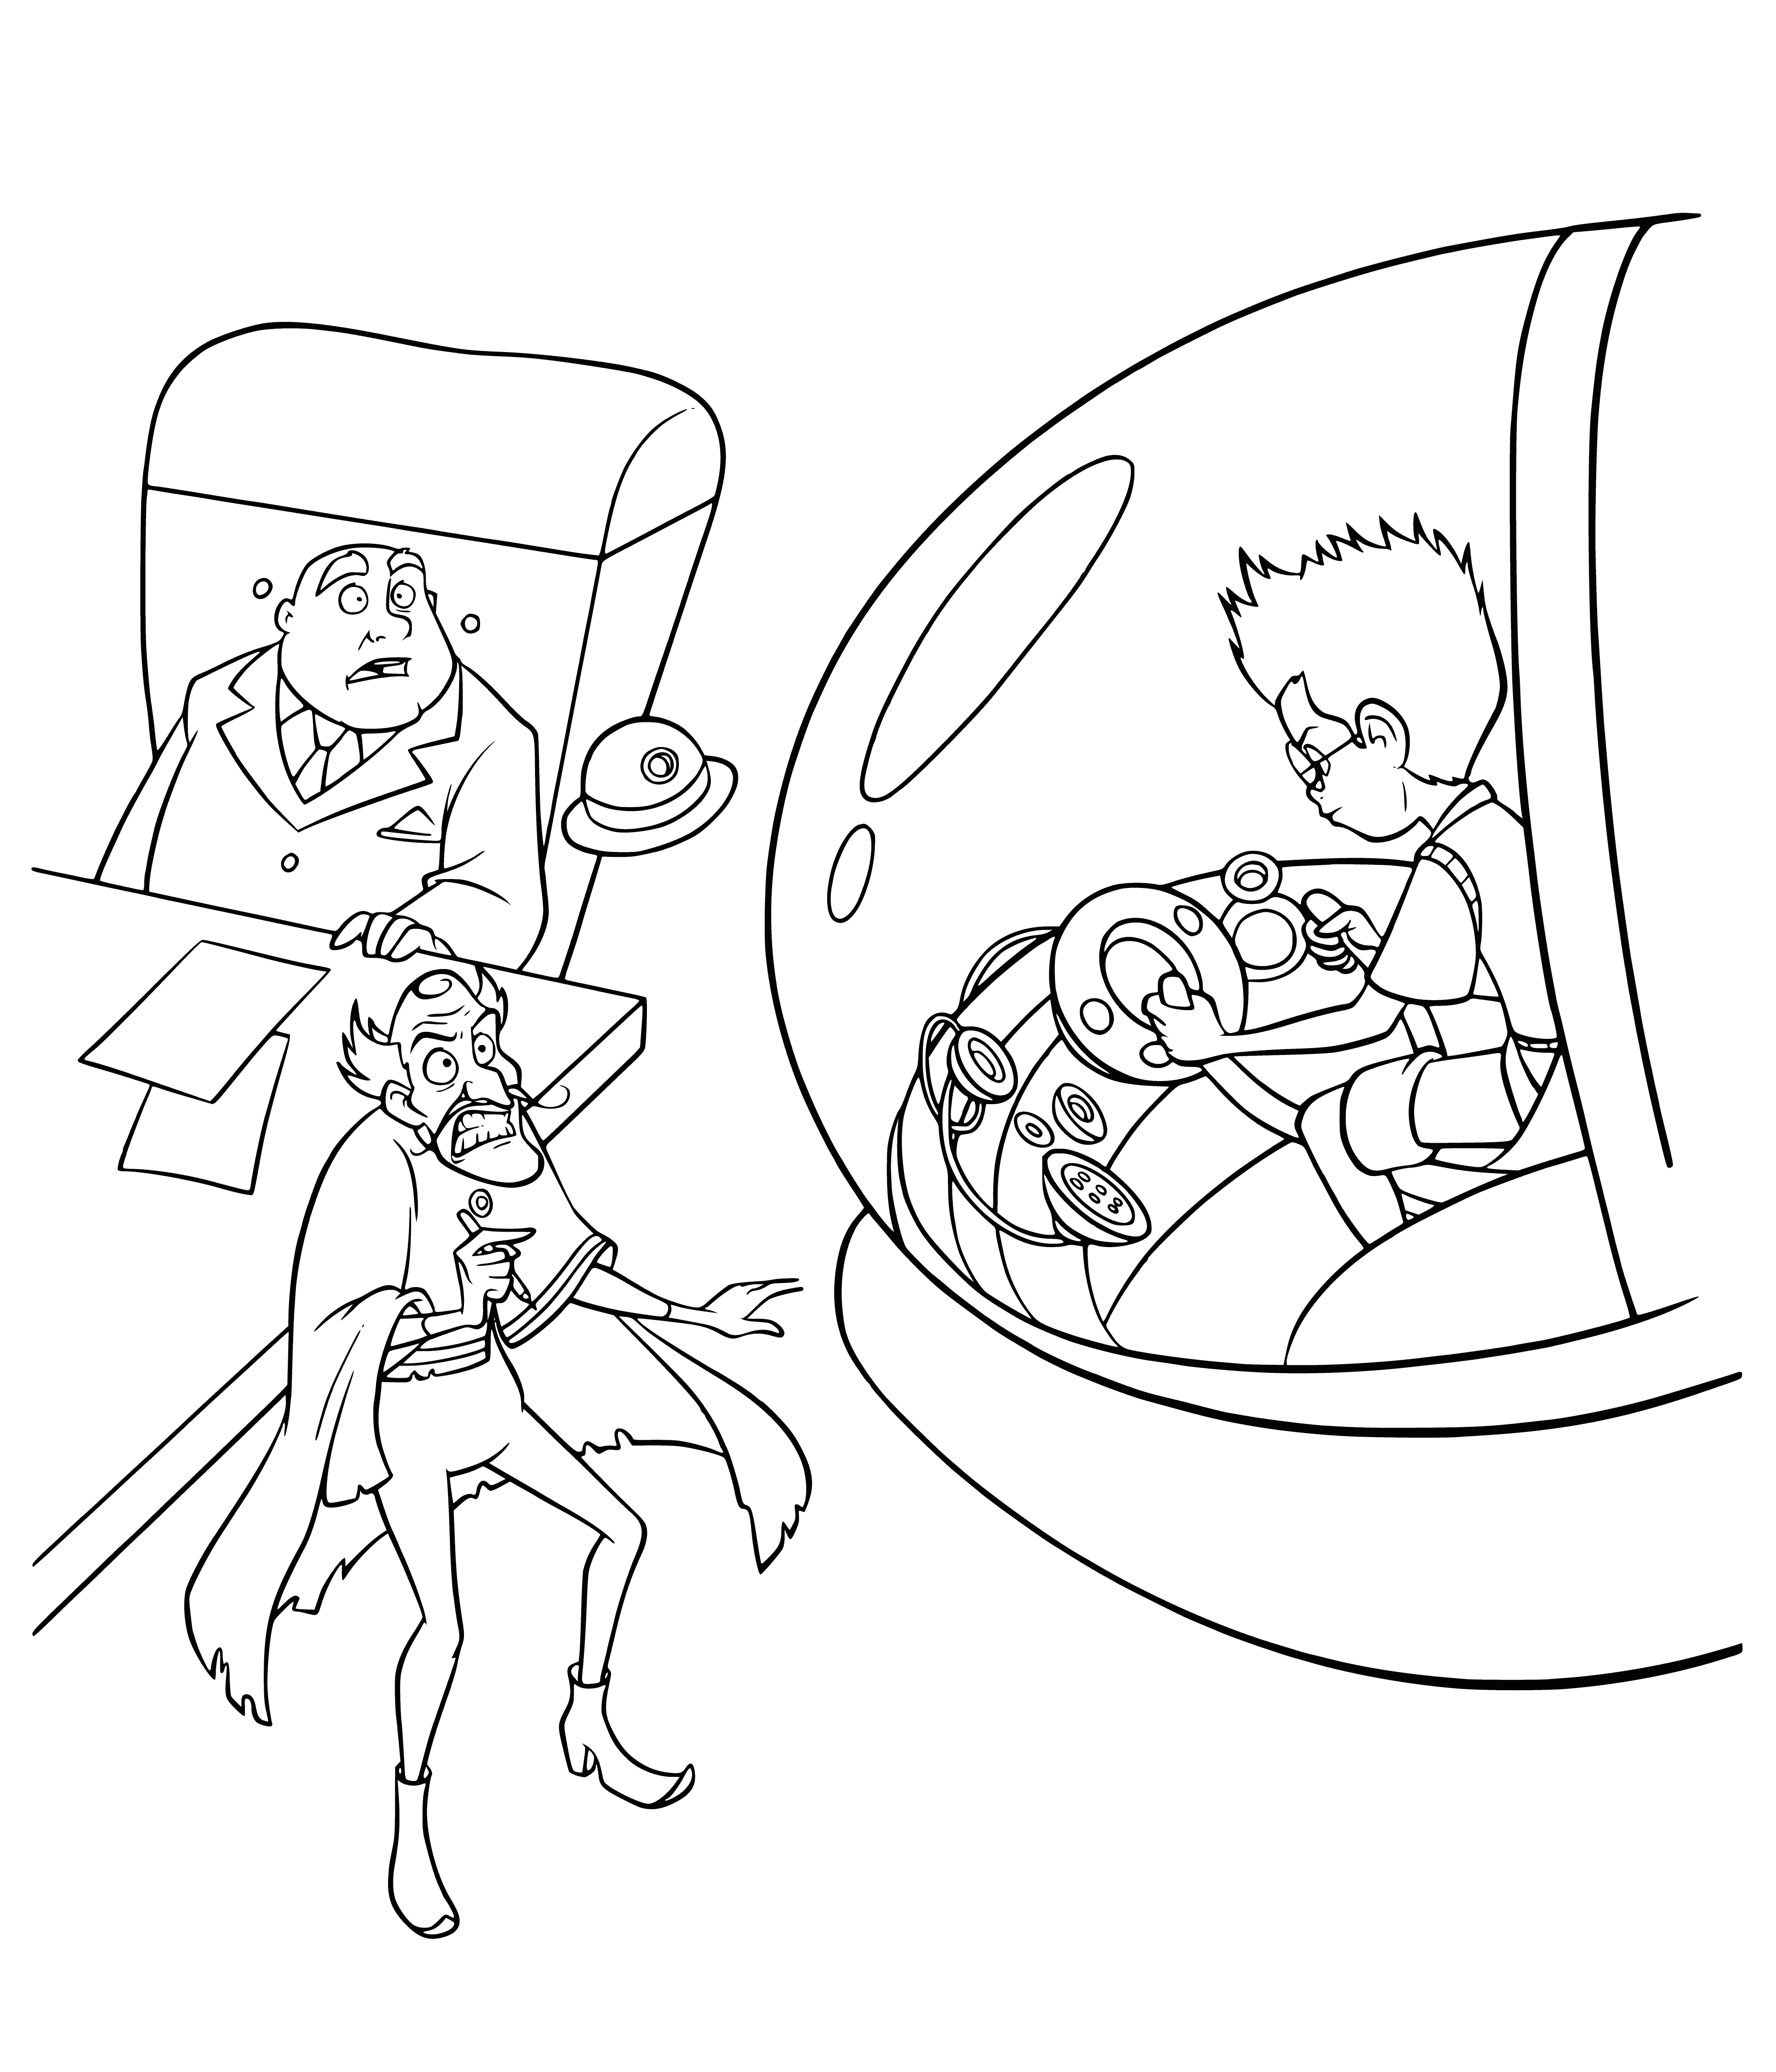 coloring page: Time travel into the future with the Time Machine. Make new friends and explore the world of tomorrow. #timemachine